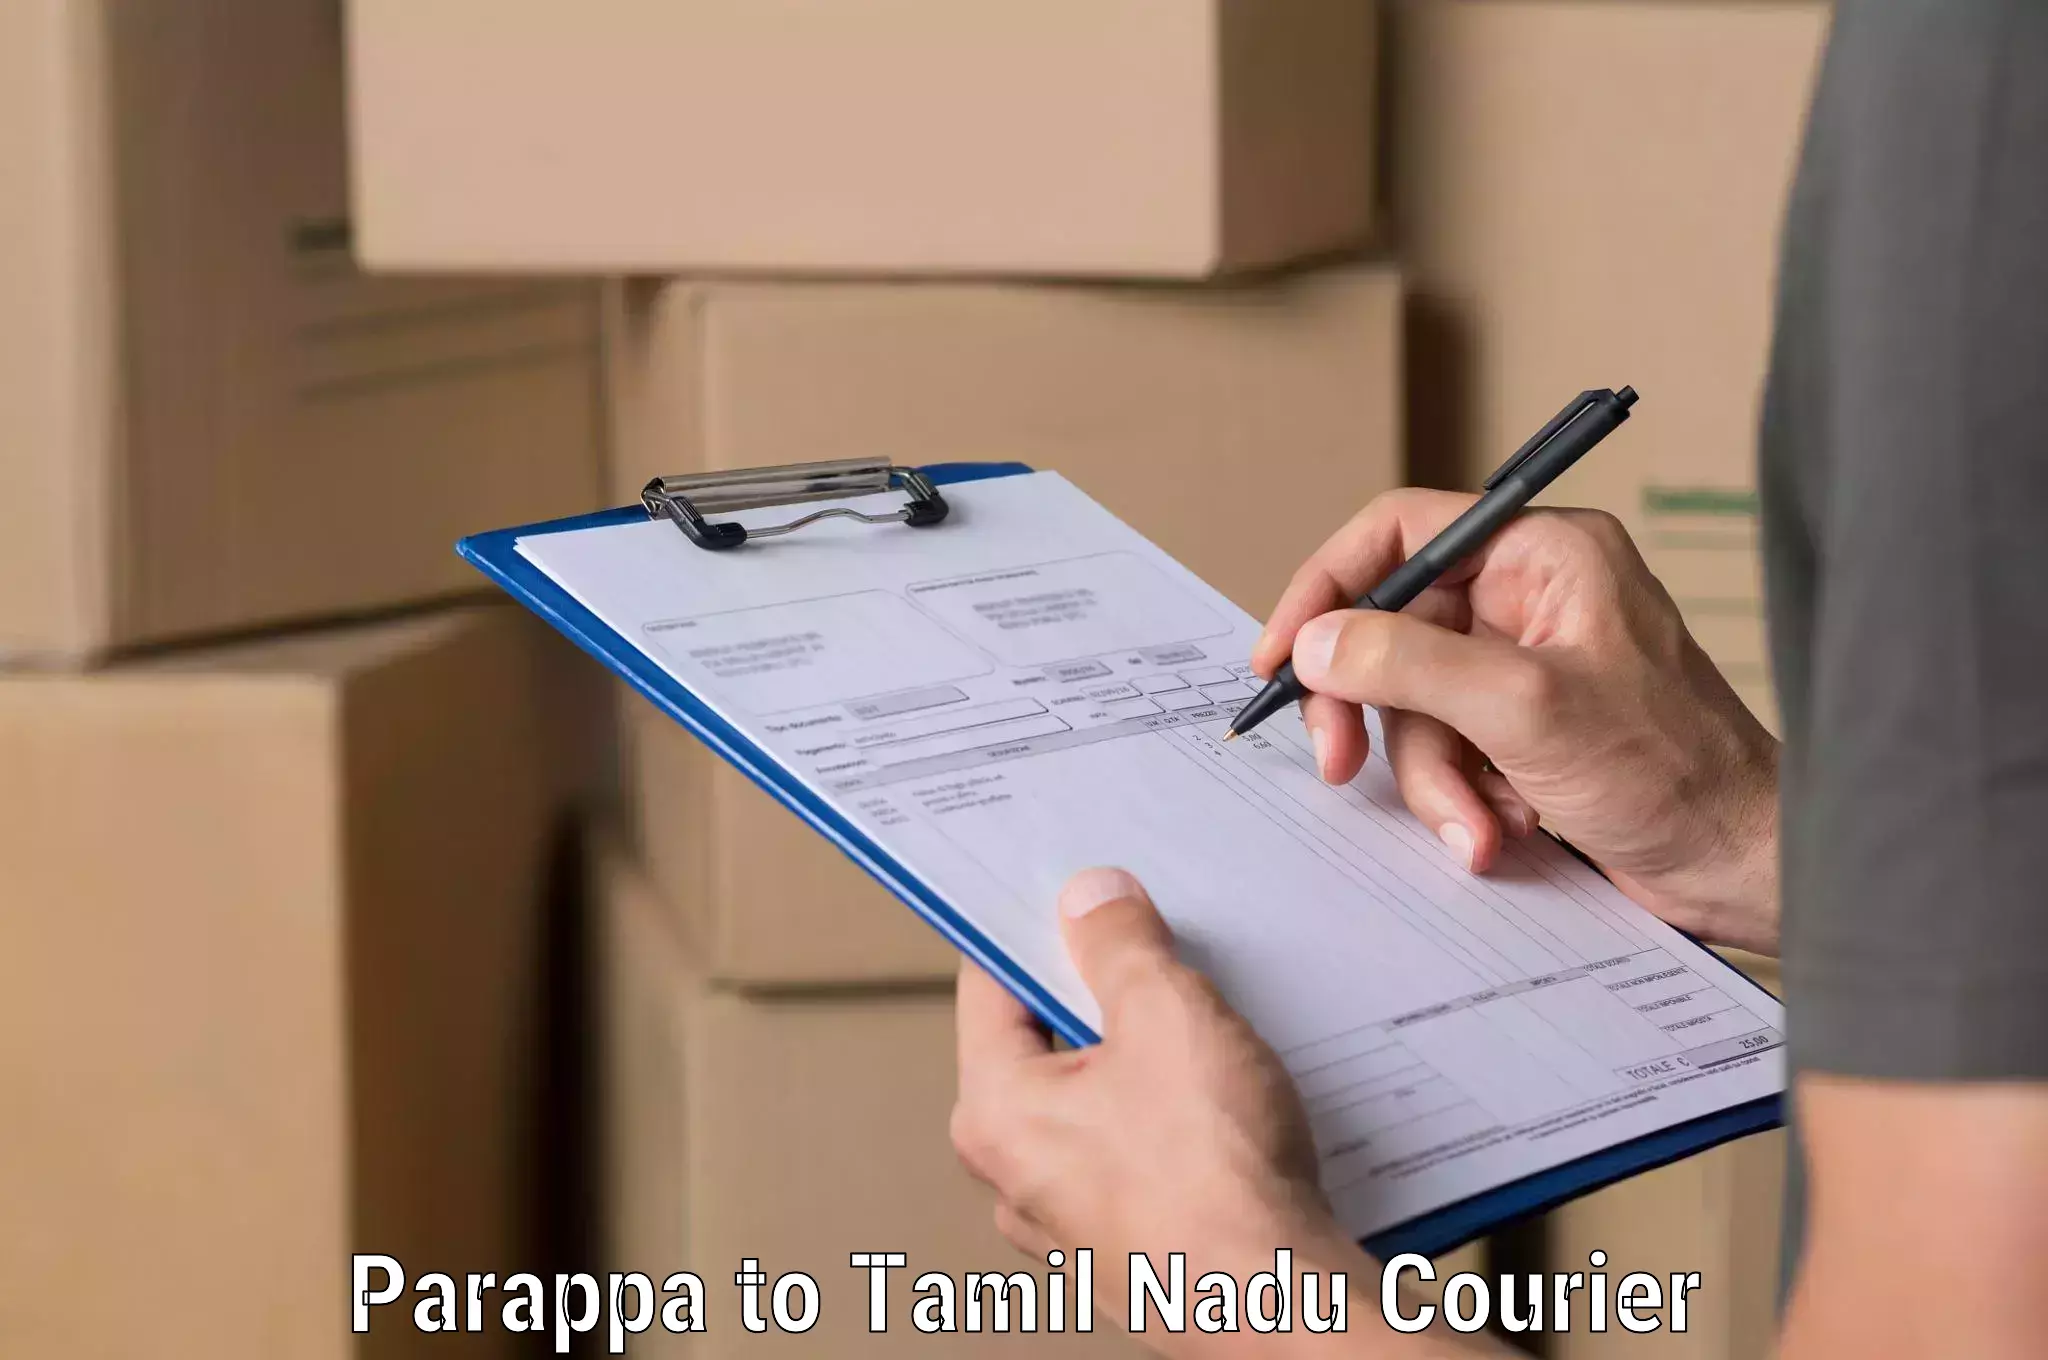 On-call courier service Parappa to Tamil Nadu